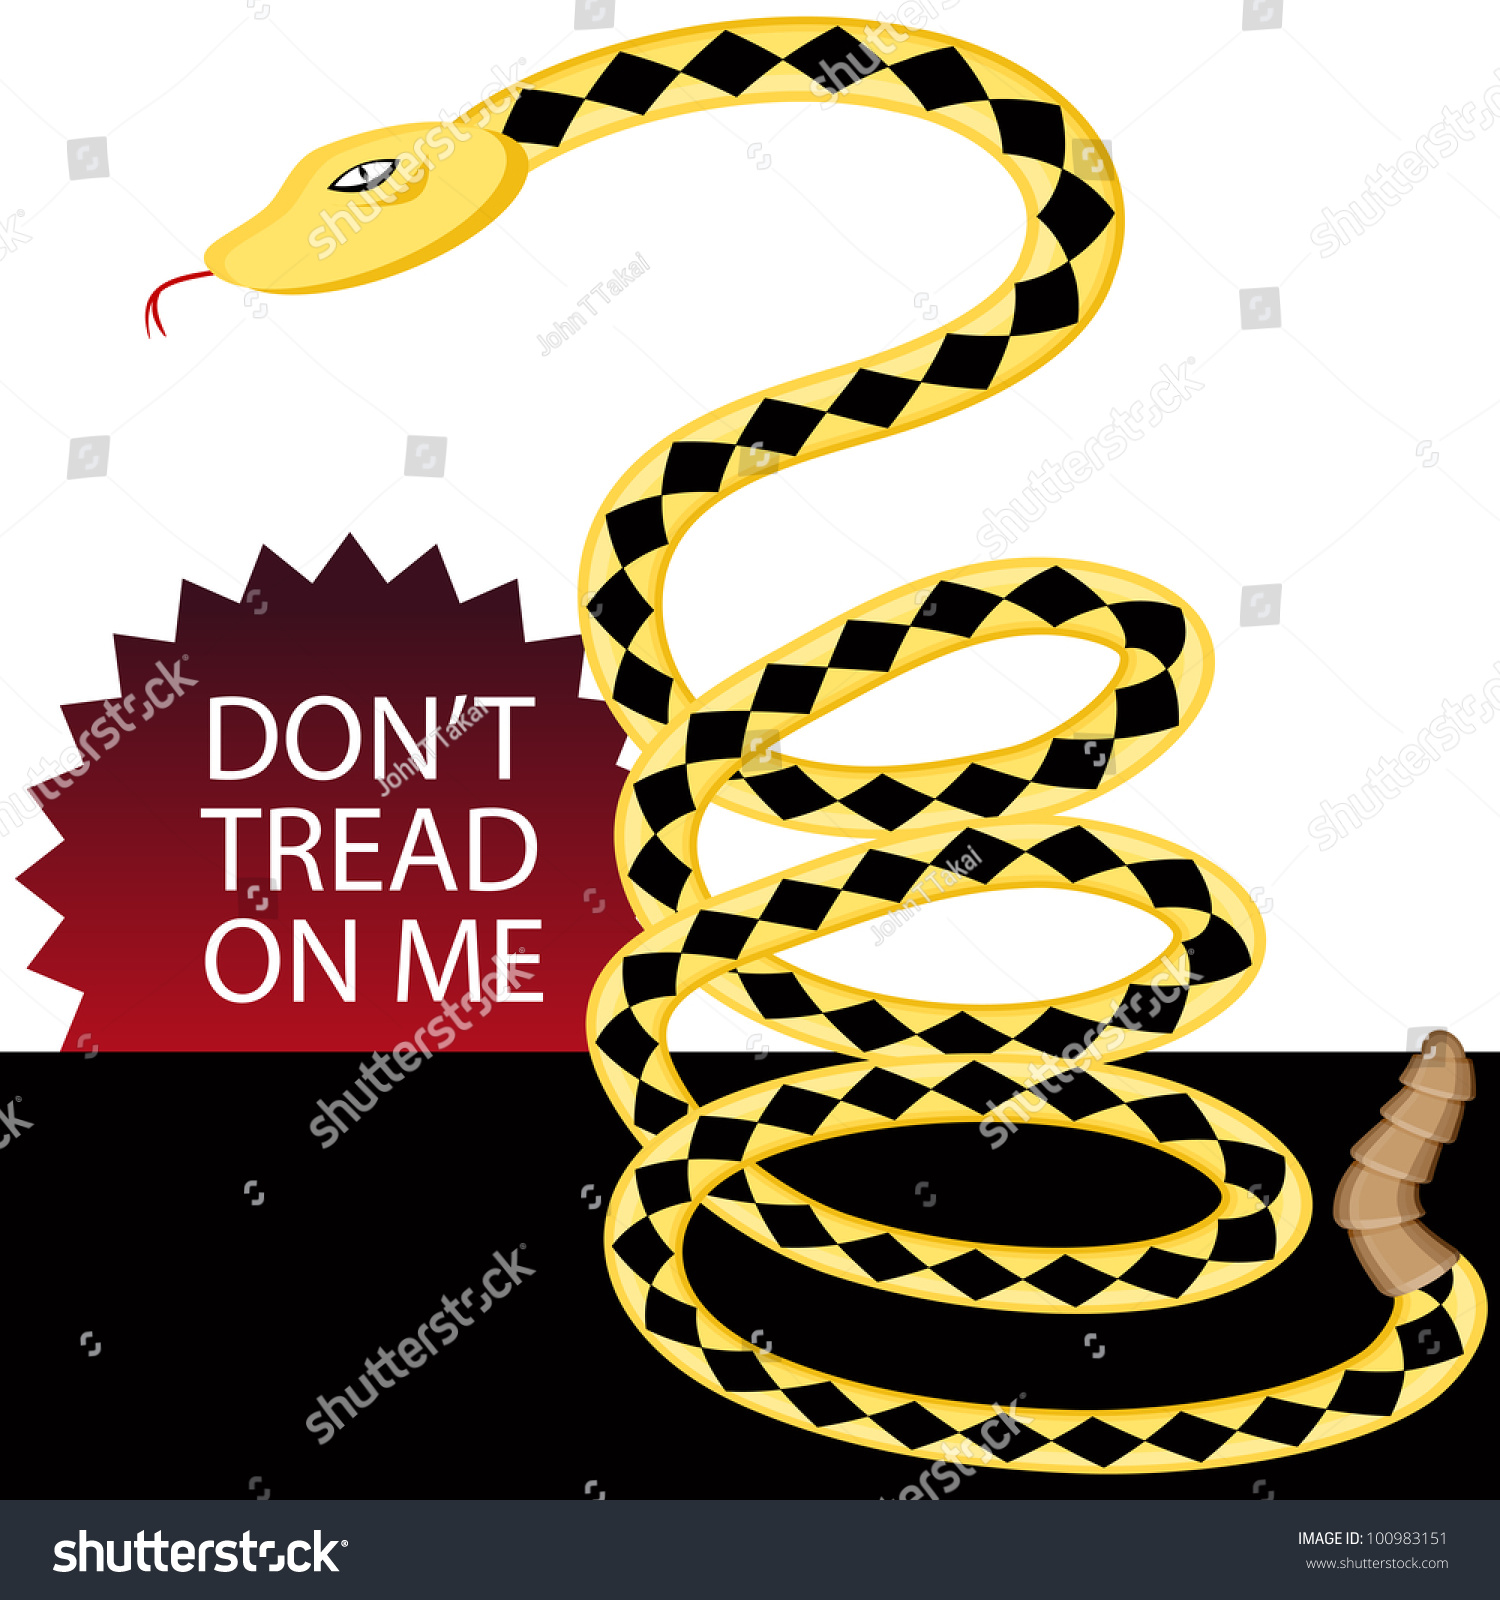 SVG of An image of a yellow rattlesnake. svg